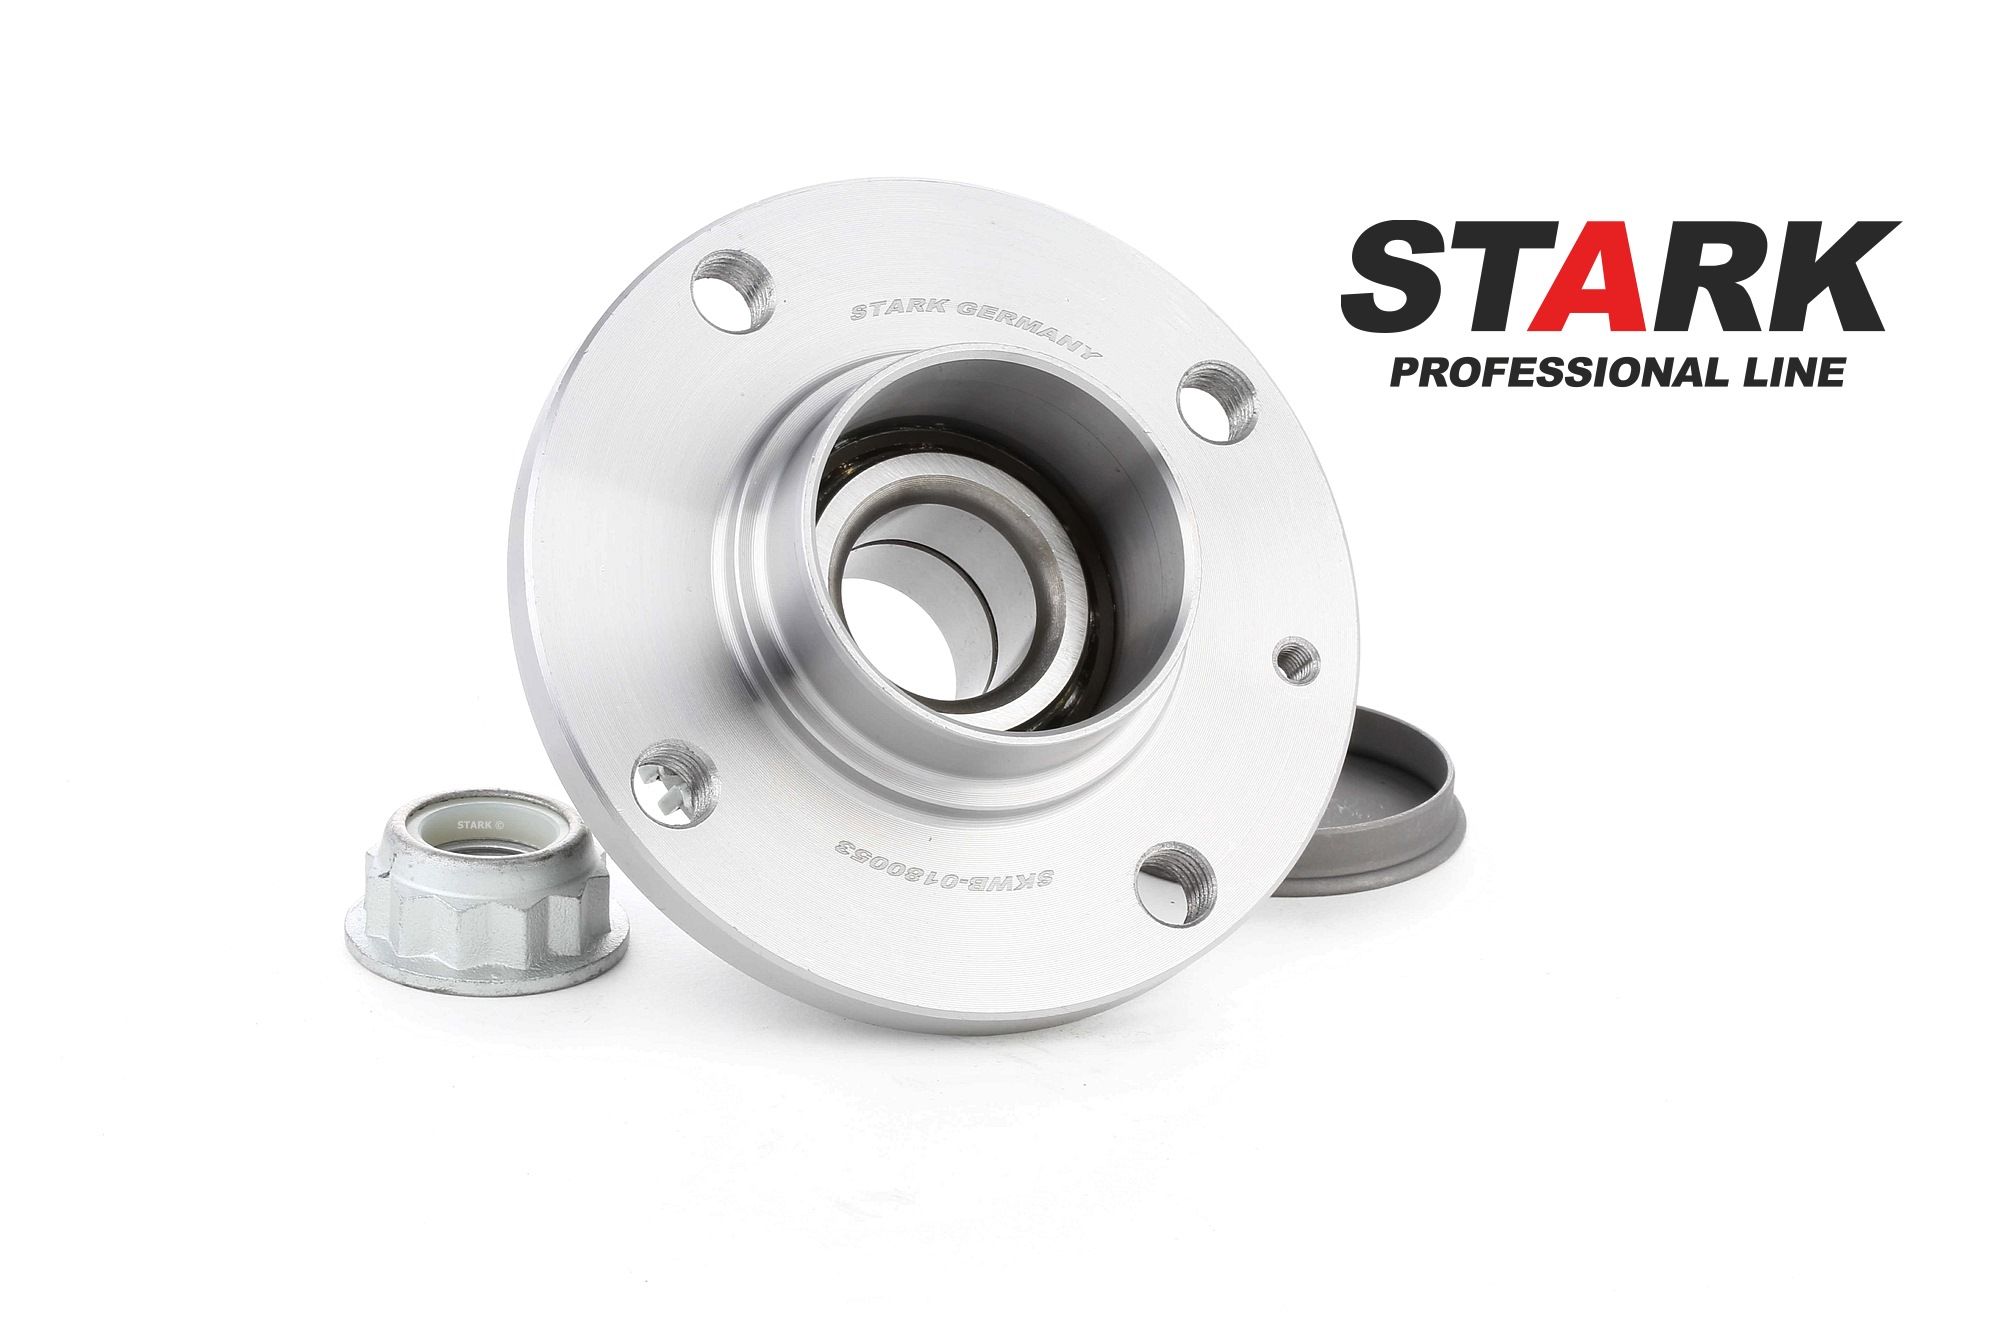 STARK SKWB-0180053 Wheel bearing kit Rear Axle both sides, with wheel hub, with integrated ABS sensor, 120 mm